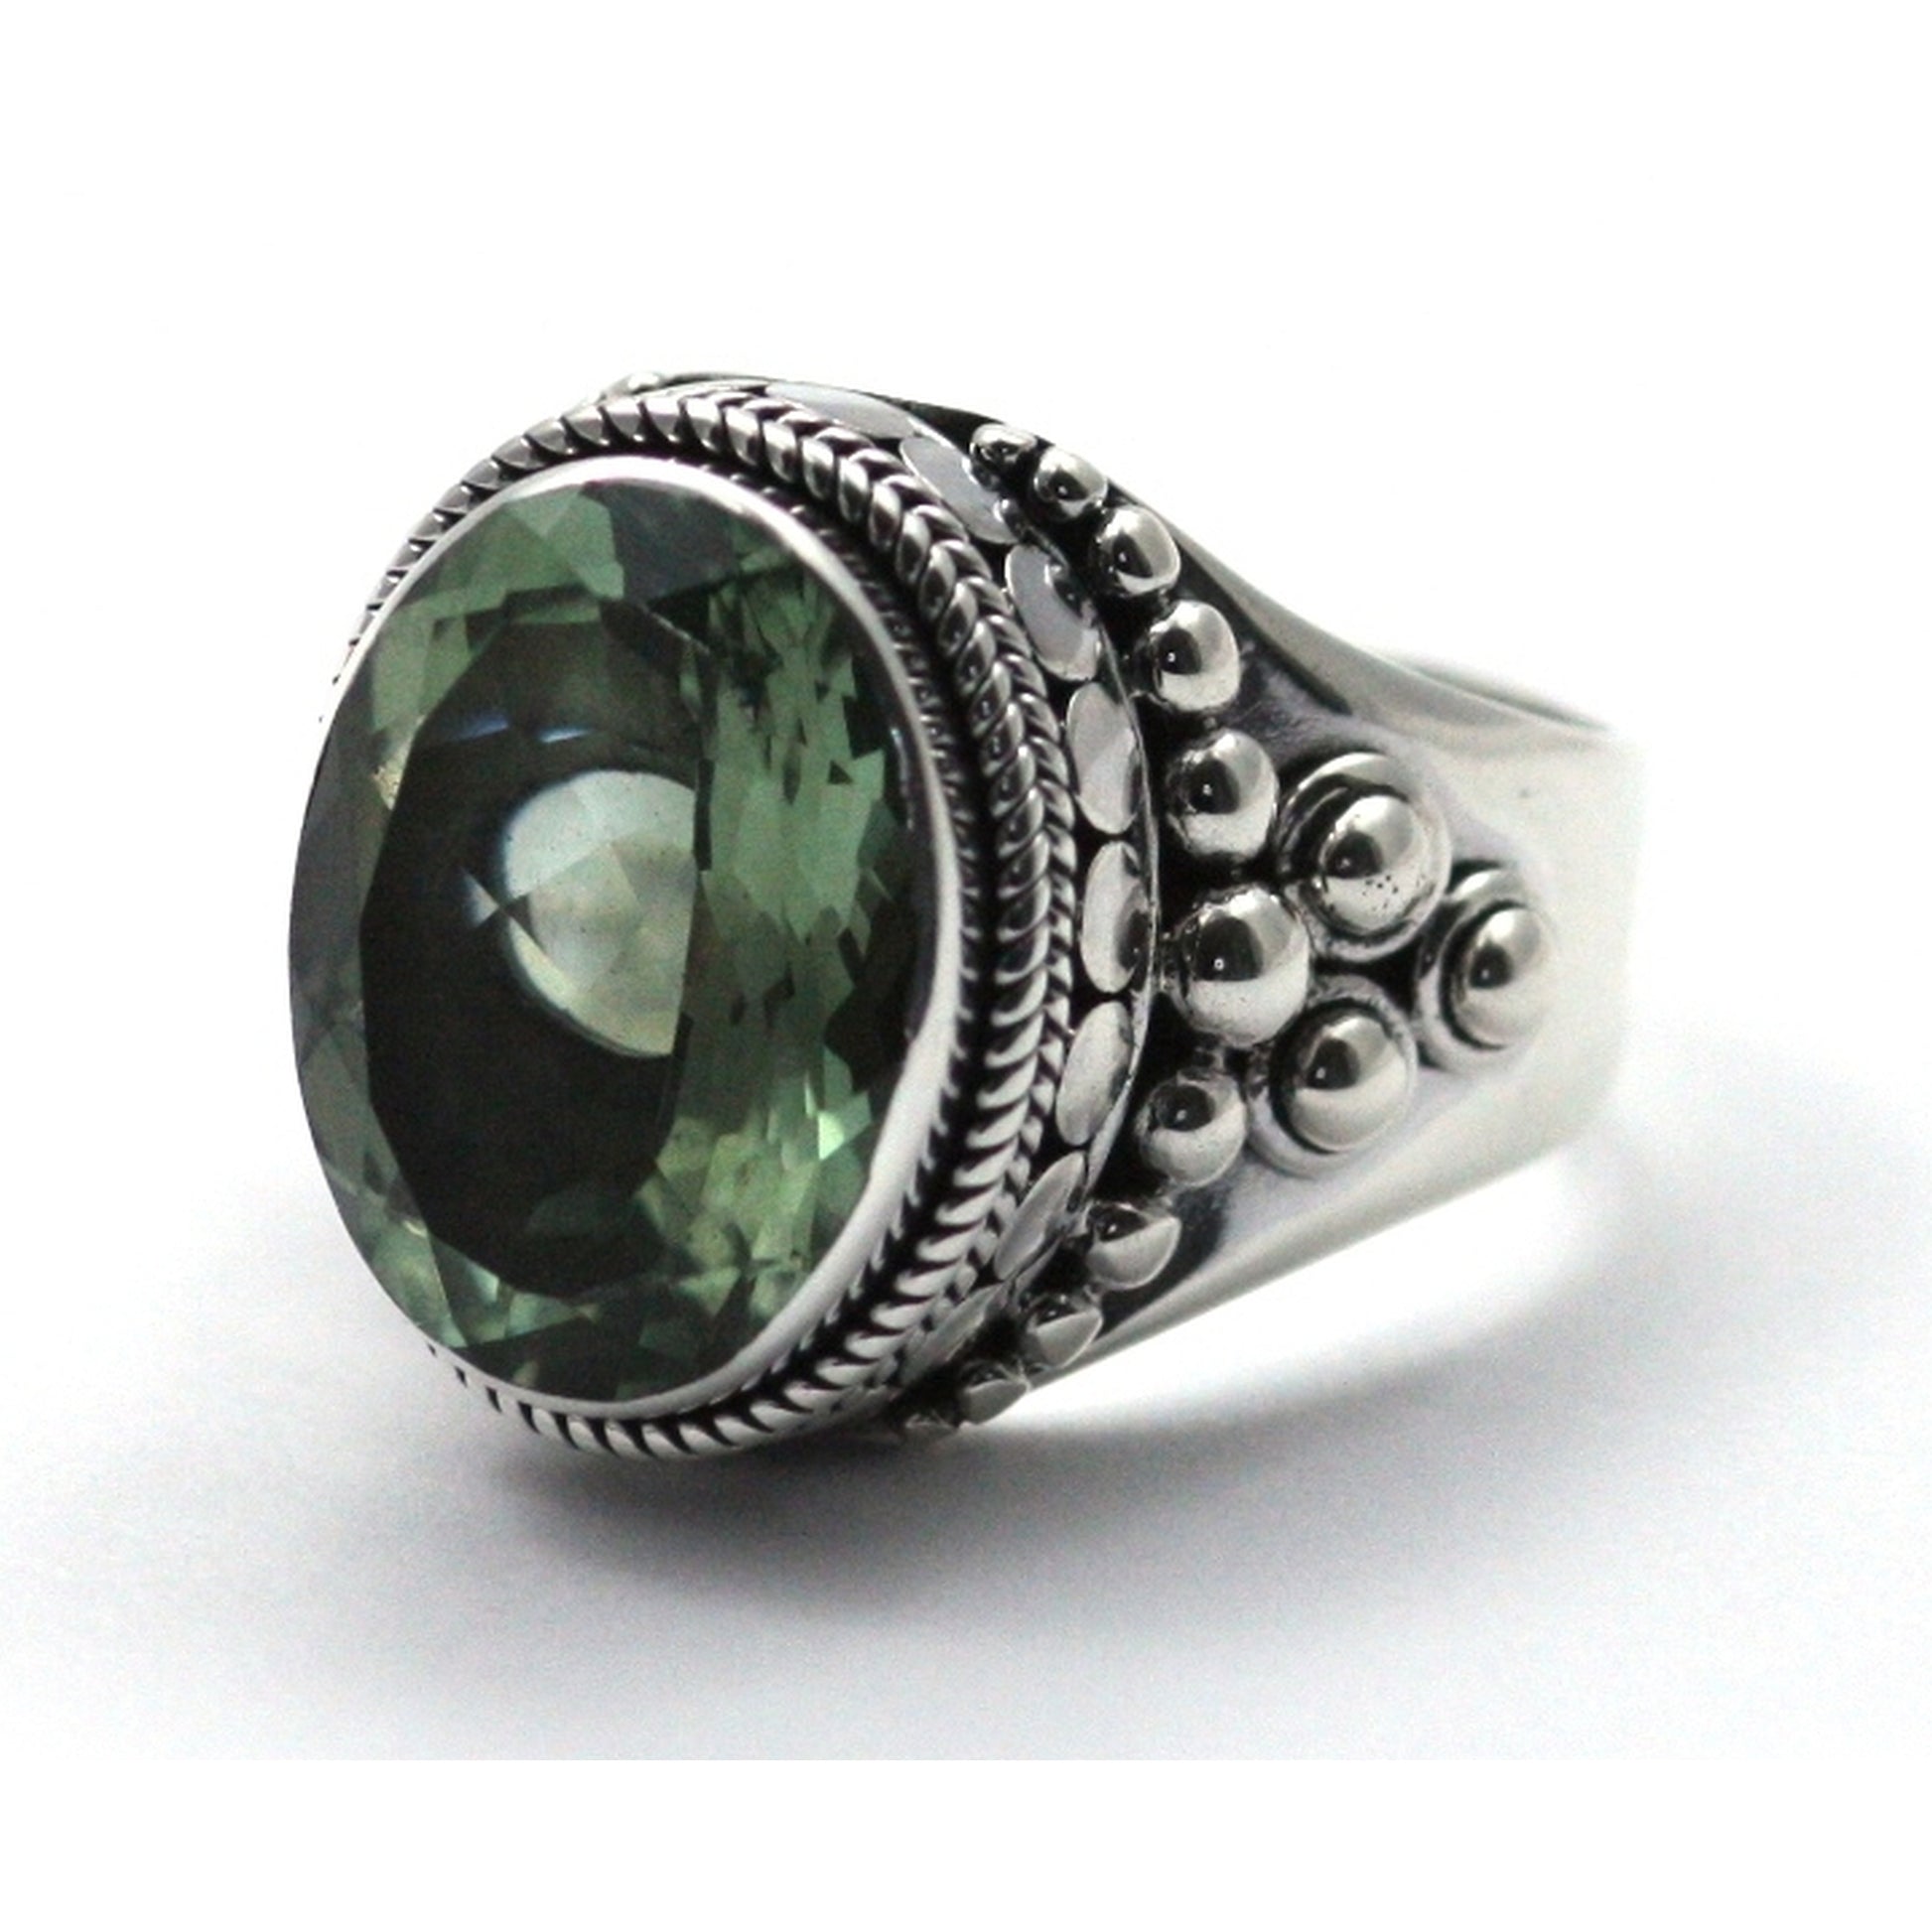 Silver ring with oval green amethyst gemstone.